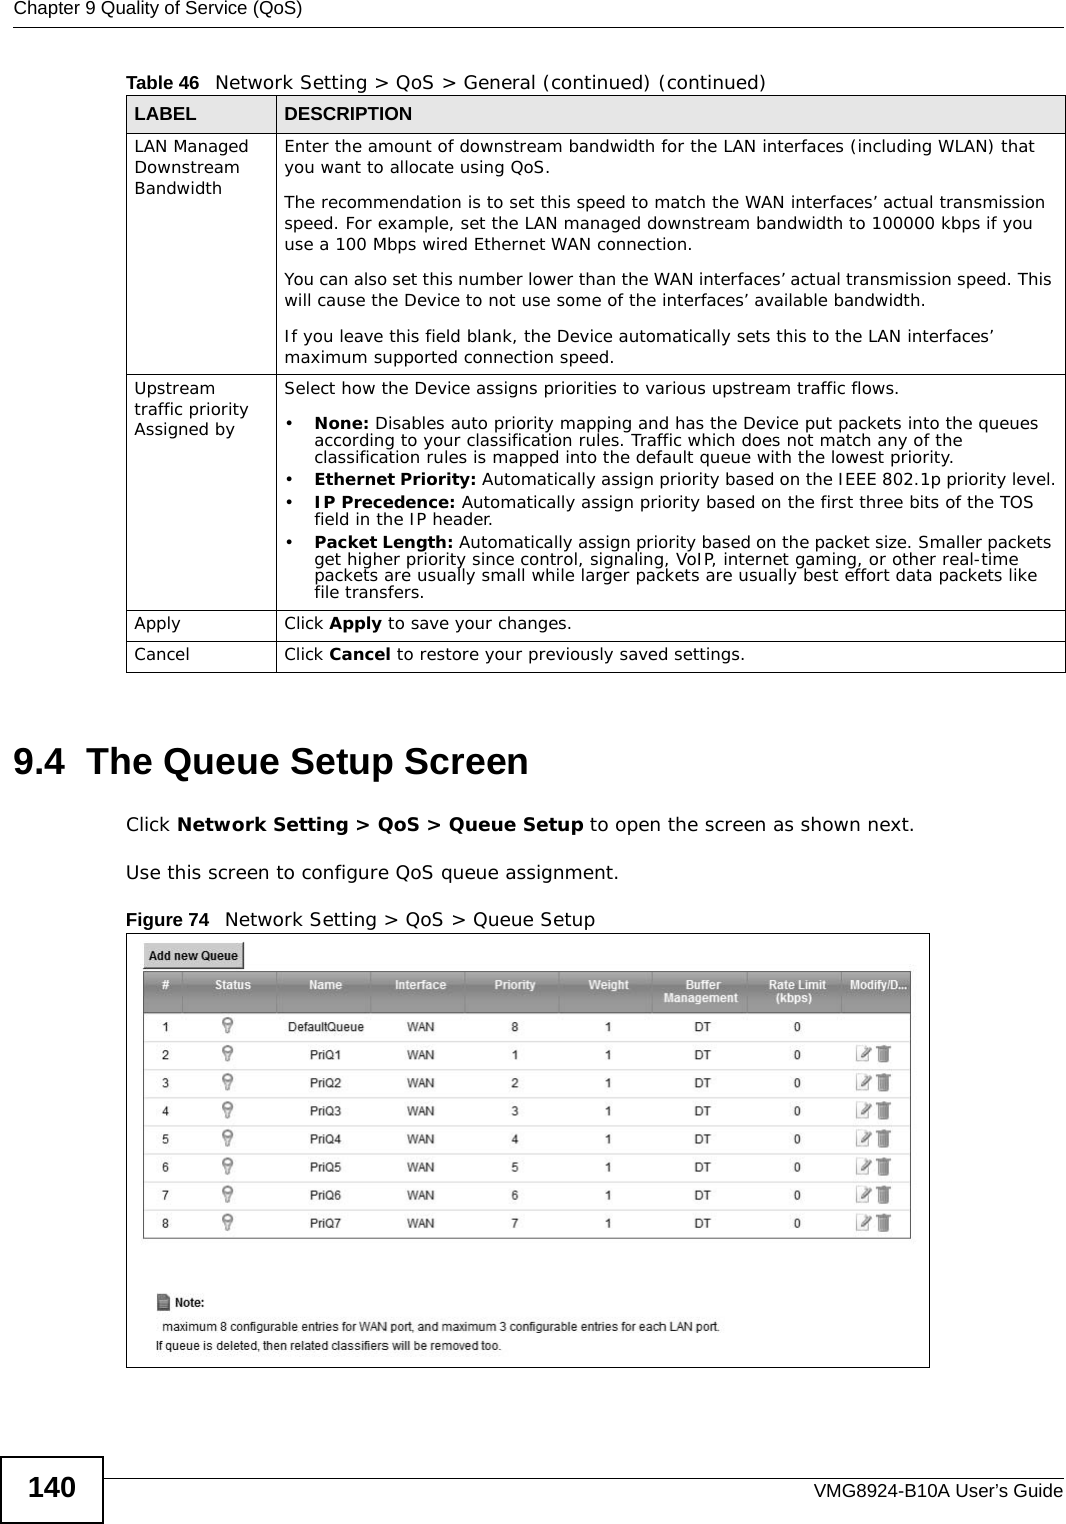 Chapter 9 Quality of Service (QoS)VMG8924-B10A User’s Guide1409.4  The Queue Setup ScreenClick Network Setting &gt; QoS &gt; Queue Setup to open the screen as shown next. Use this screen to configure QoS queue assignment. Figure 74   Network Setting &gt; QoS &gt; Queue Setup LAN Managed Downstream Bandwidth Enter the amount of downstream bandwidth for the LAN interfaces (including WLAN) that you want to allocate using QoS. The recommendation is to set this speed to match the WAN interfaces’ actual transmission speed. For example, set the LAN managed downstream bandwidth to 100000 kbps if you use a 100 Mbps wired Ethernet WAN connection.        You can also set this number lower than the WAN interfaces’ actual transmission speed. This will cause the Device to not use some of the interfaces’ available bandwidth.If you leave this field blank, the Device automatically sets this to the LAN interfaces’ maximum supported connection speed.Upstream traffic priority Assigned bySelect how the Device assigns priorities to various upstream traffic flows.•None: Disables auto priority mapping and has the Device put packets into the queues according to your classification rules. Traffic which does not match any of the classification rules is mapped into the default queue with the lowest priority.•Ethernet Priority: Automatically assign priority based on the IEEE 802.1p priority level.•IP Precedence: Automatically assign priority based on the first three bits of the TOS field in the IP header.•Packet Length: Automatically assign priority based on the packet size. Smaller packets get higher priority since control, signaling, VoIP, internet gaming, or other real-time packets are usually small while larger packets are usually best effort data packets like file transfers.Apply Click Apply to save your changes.Cancel Click Cancel to restore your previously saved settings.Table 46   Network Setting &gt; QoS &gt; General (continued) (continued)LABEL DESCRIPTION